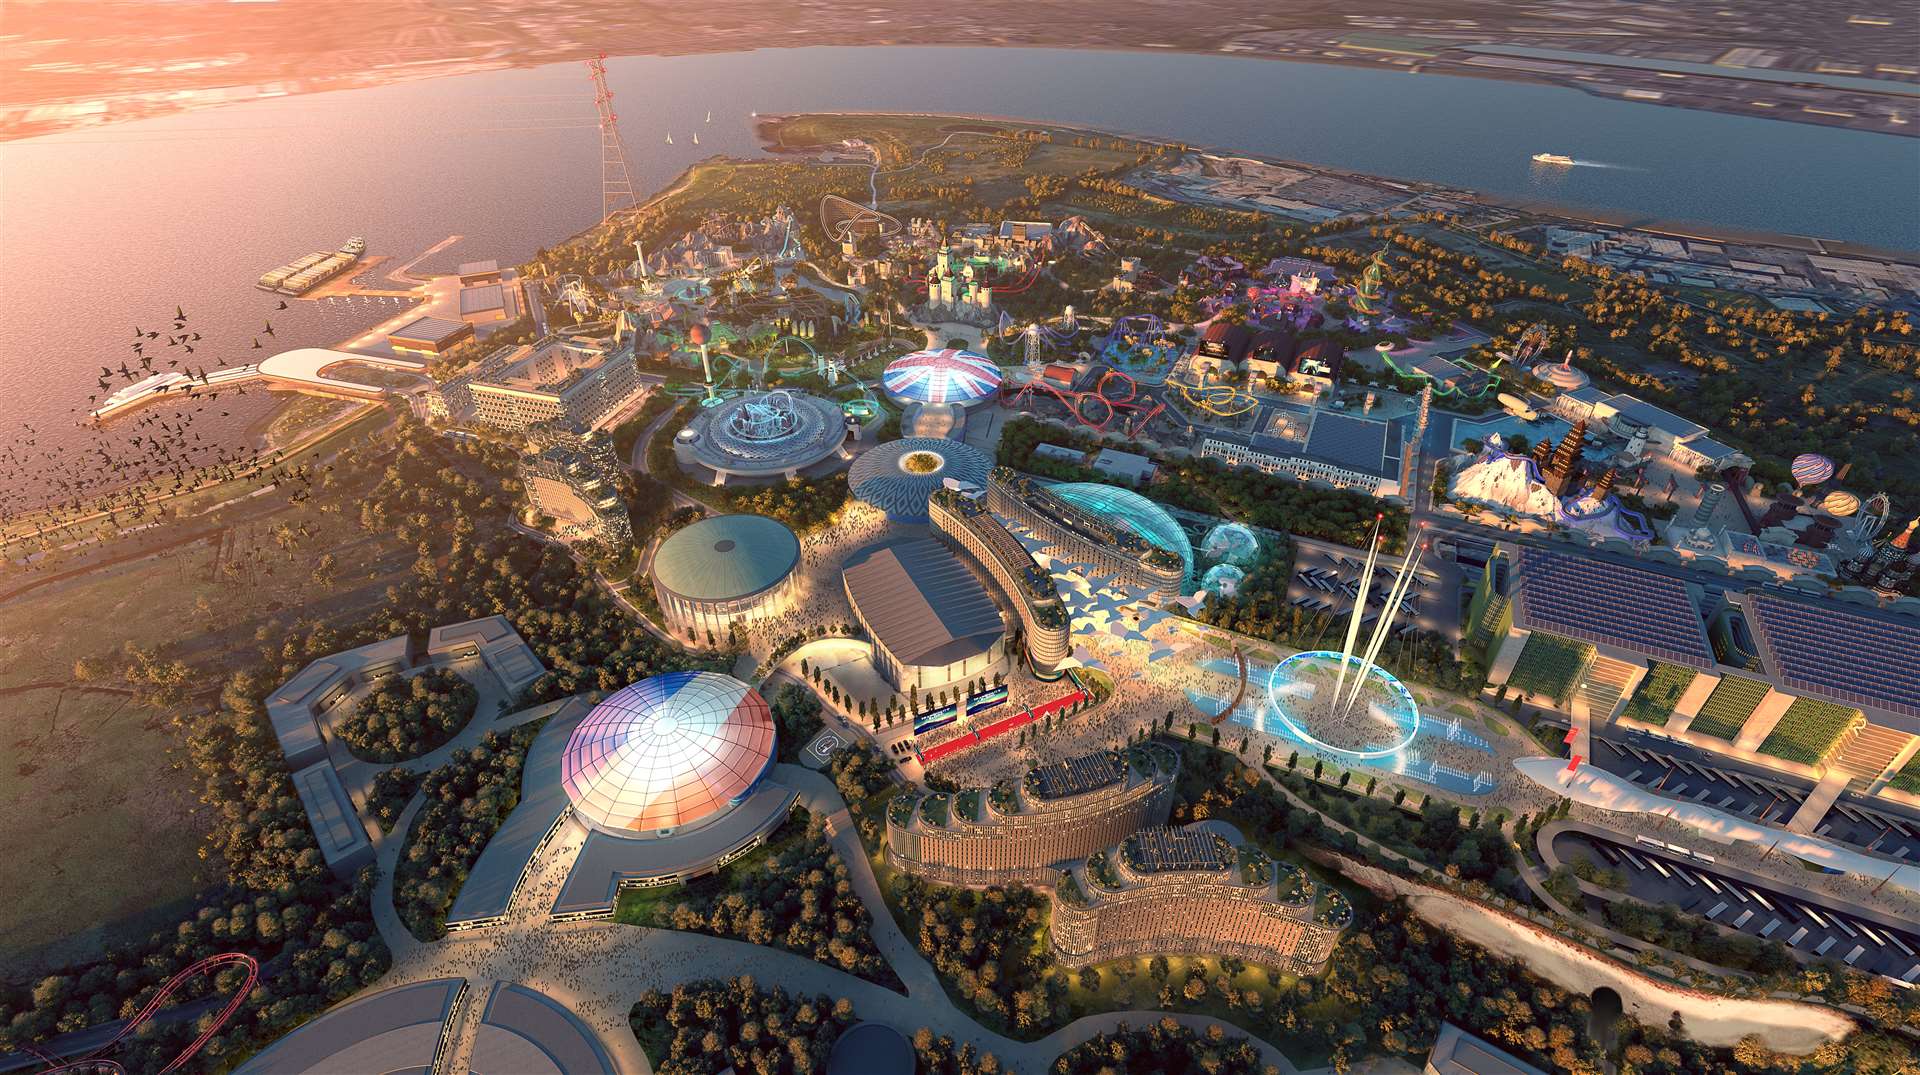 A detailed impression of what the London Resort theme park could look like